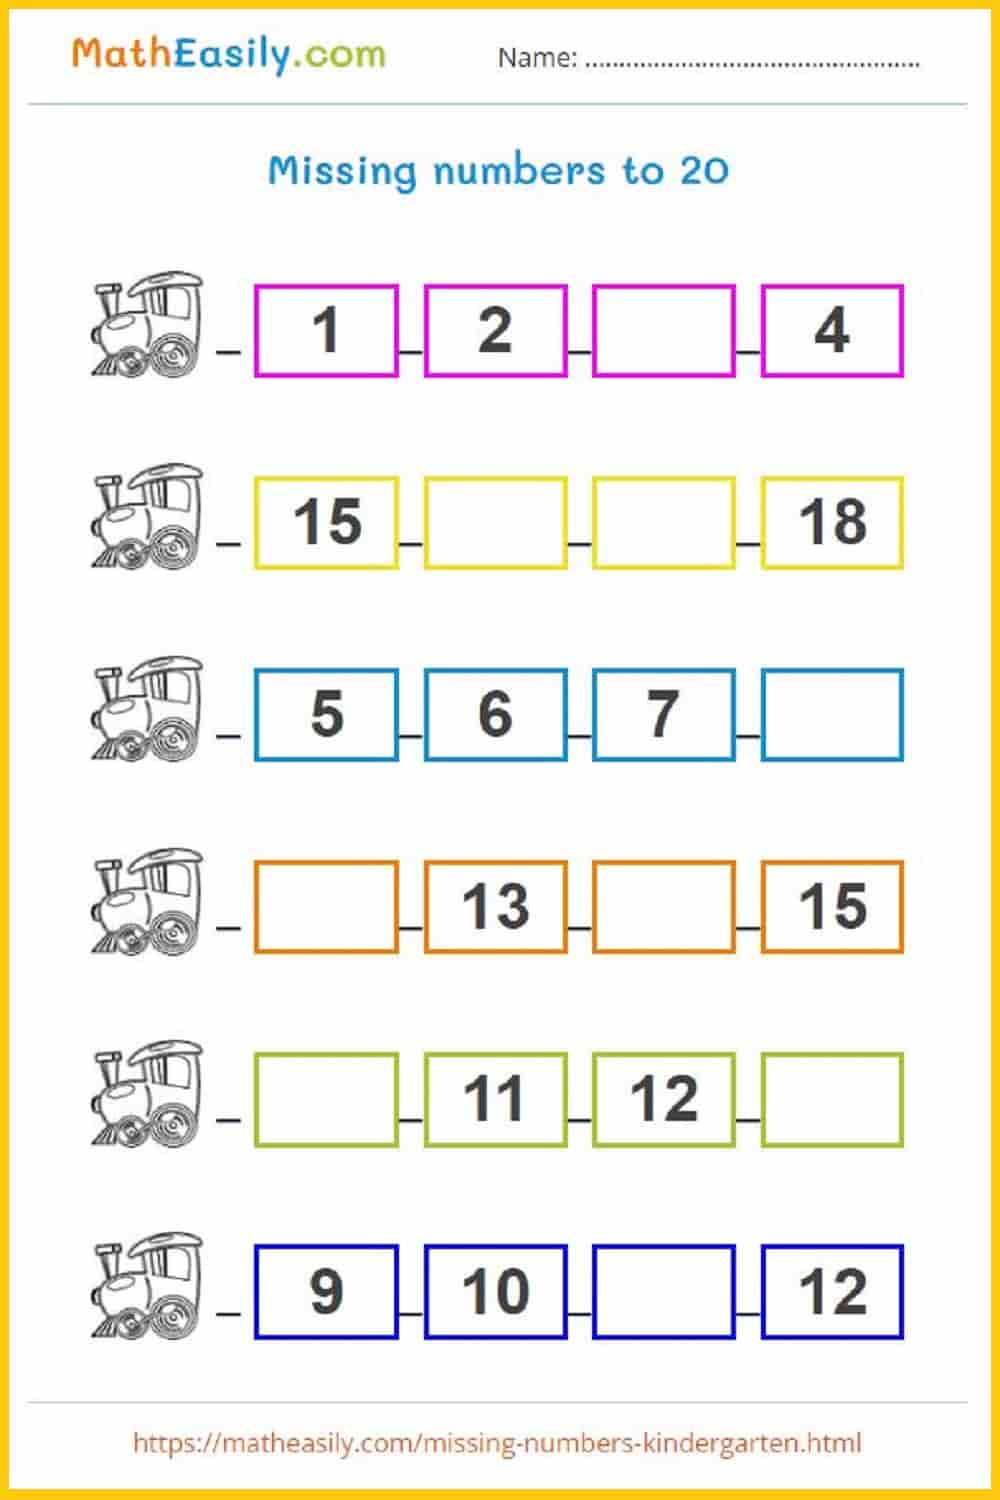 Missing number worksheets 1 20. find the missing numbers worksheets for kindergarten in PDF. missing numbers 1 to 20. 
 missing number game. missing numbers activity for kindergarten. 1 to 20 missing number worksheet. 
  write missing numbers for kids. kindergarten missing number worksheets PDF. missing numbers for nursery class.